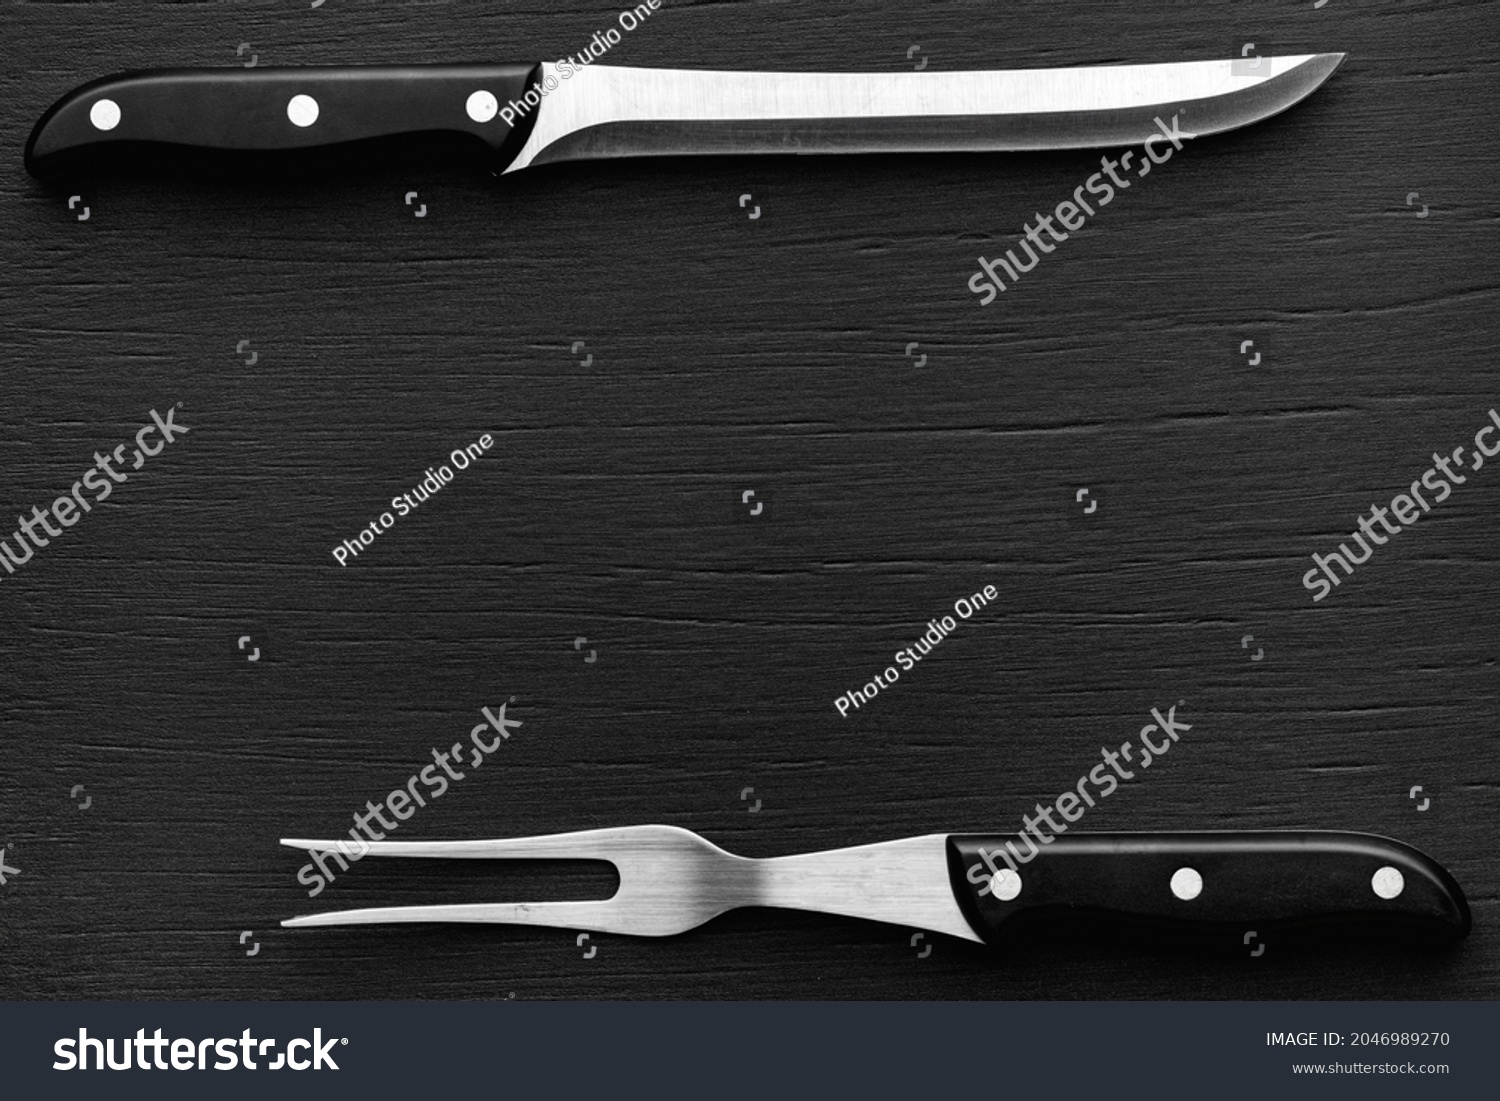 Chef’s carving set. Knife and fork on a black wood with a slightly pronounced texture. Top view with copy space. #2046989270